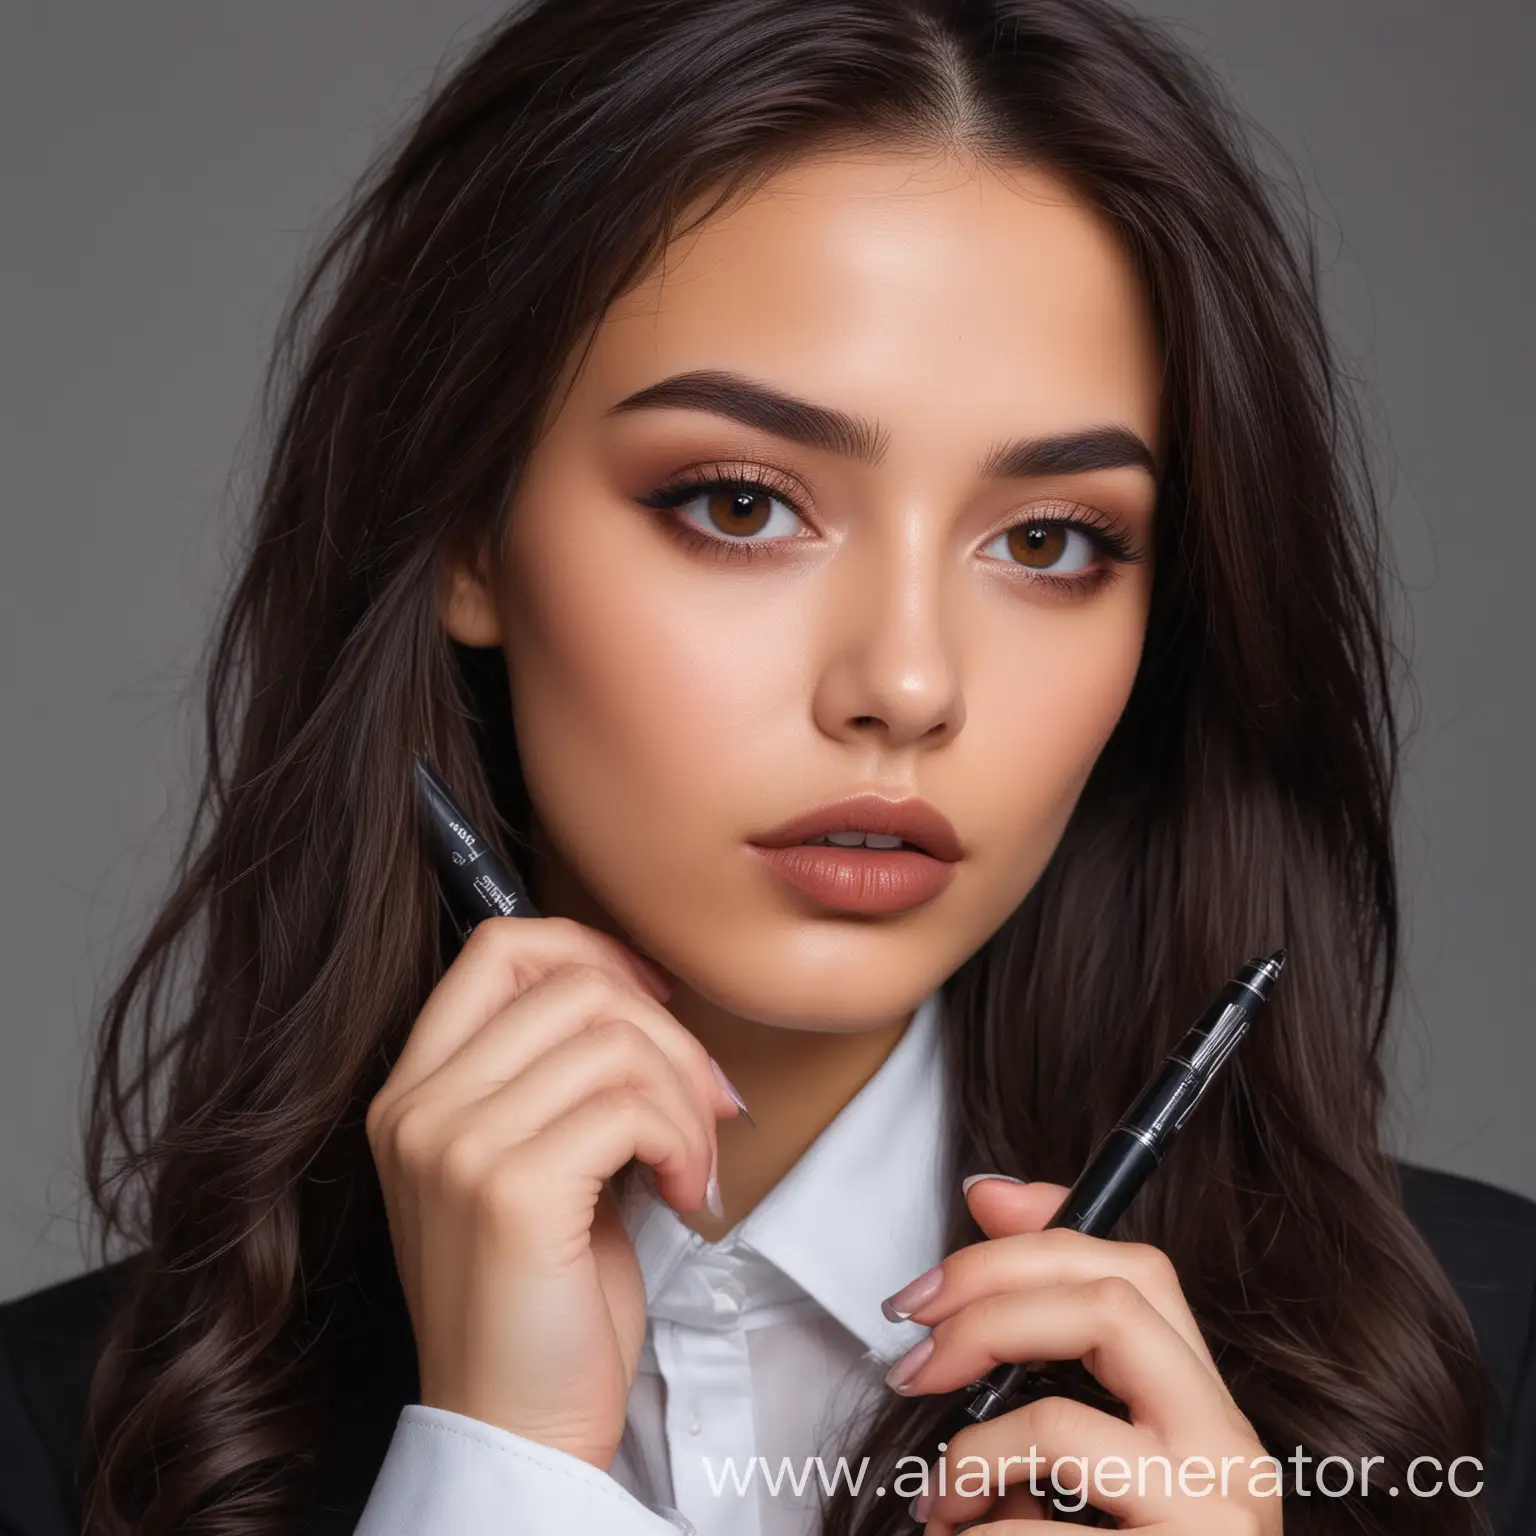 Young-Businesswoman-with-Dark-Hair-Holding-a-Pen